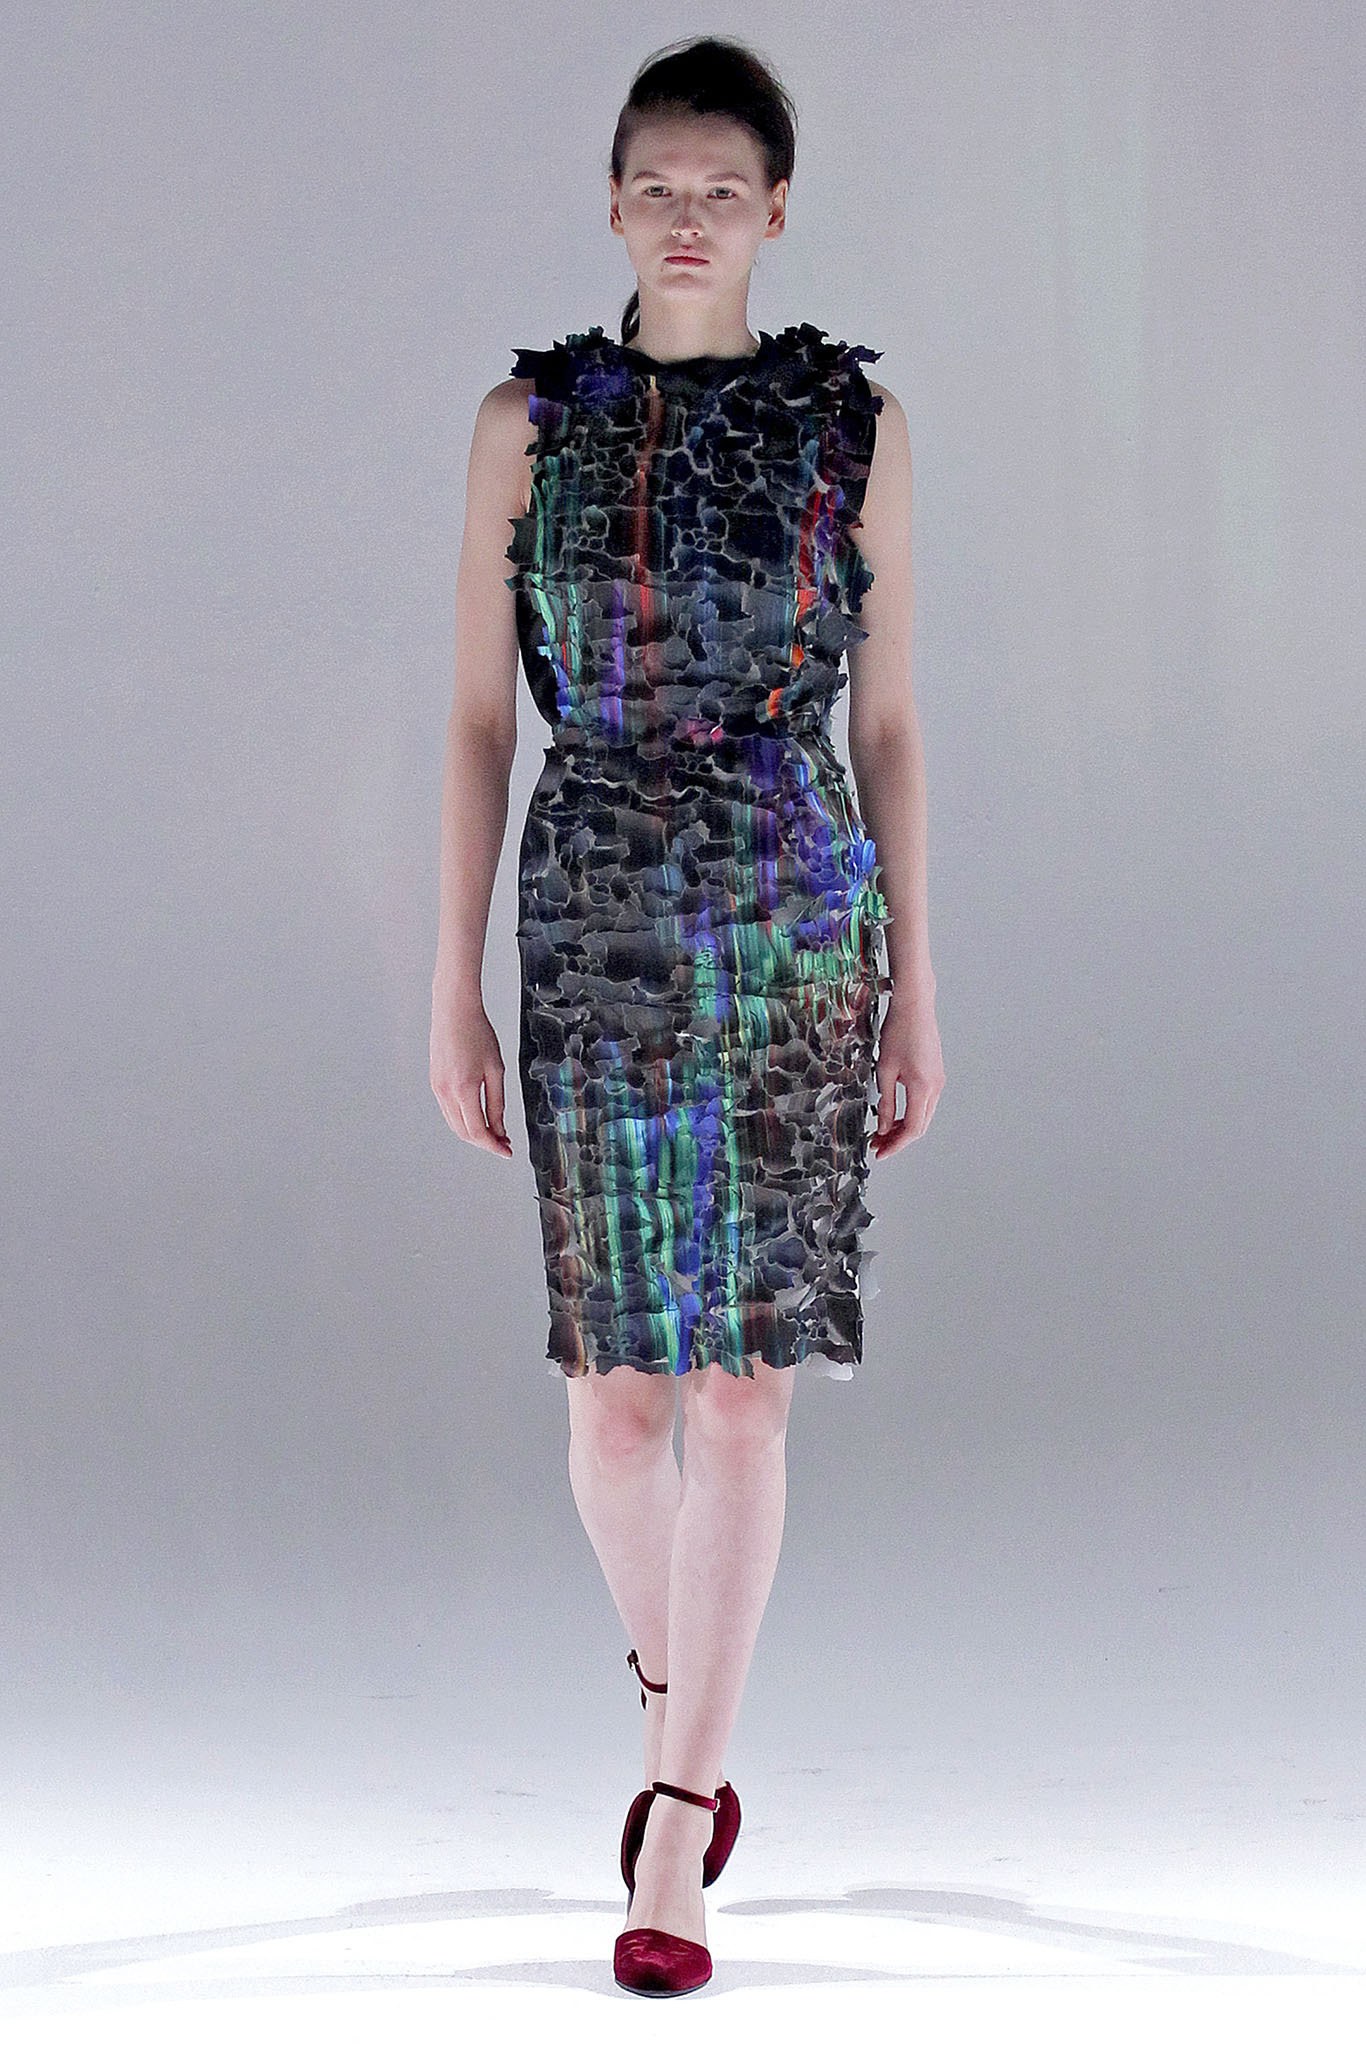  A transforming dress in Hussein Chalayan's Fall 2013 runway show. Image from Vogue.com. 